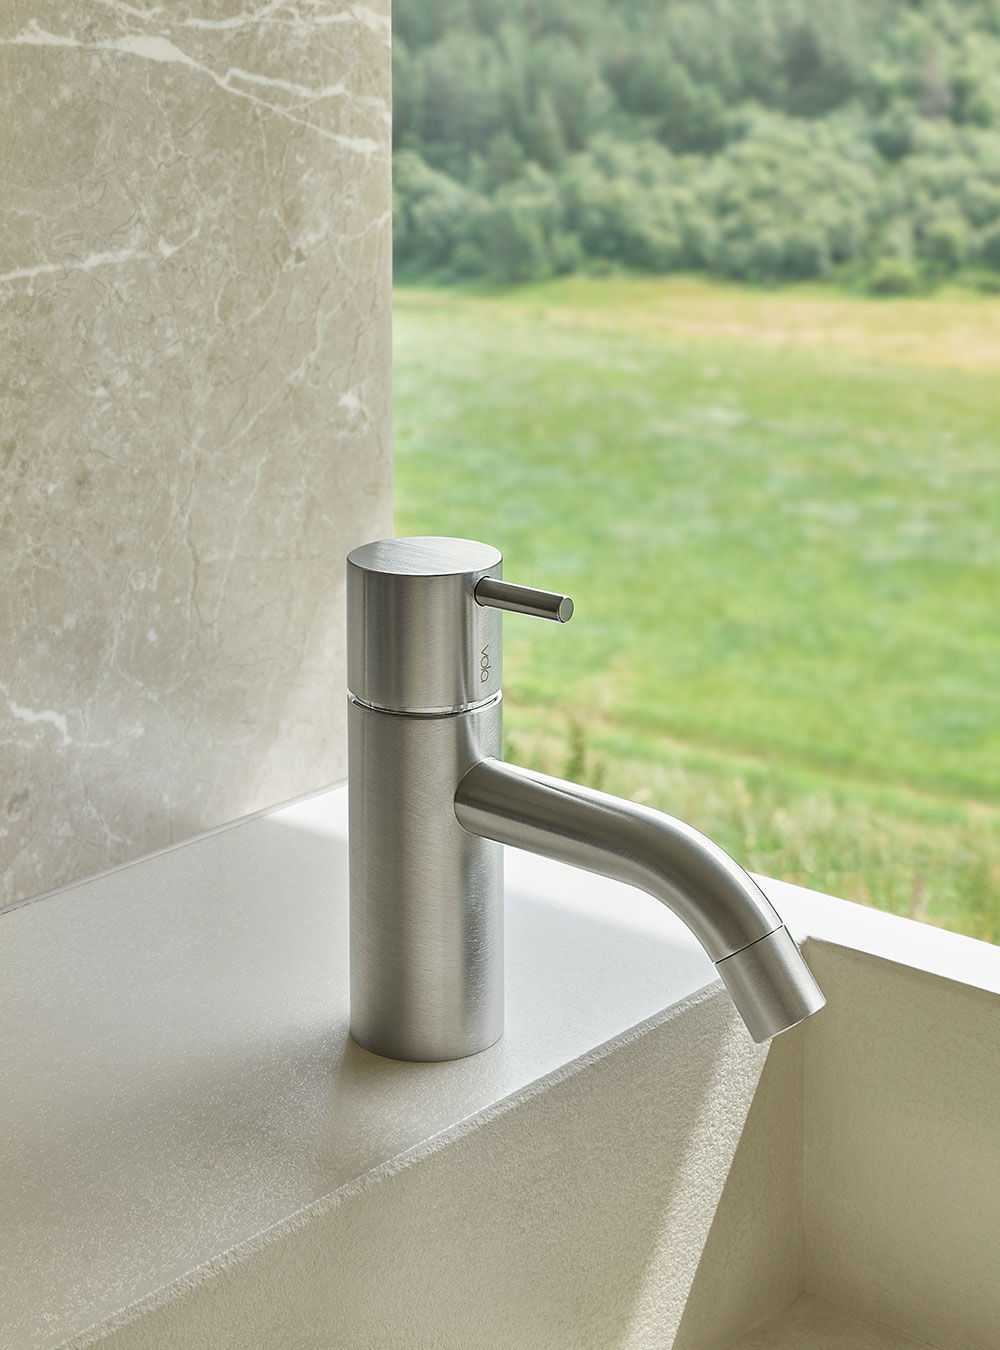 RB1: Pillar tap with ¼ turn ceramic disc technology, fixed spout with water saving aerator. Height 120 mm